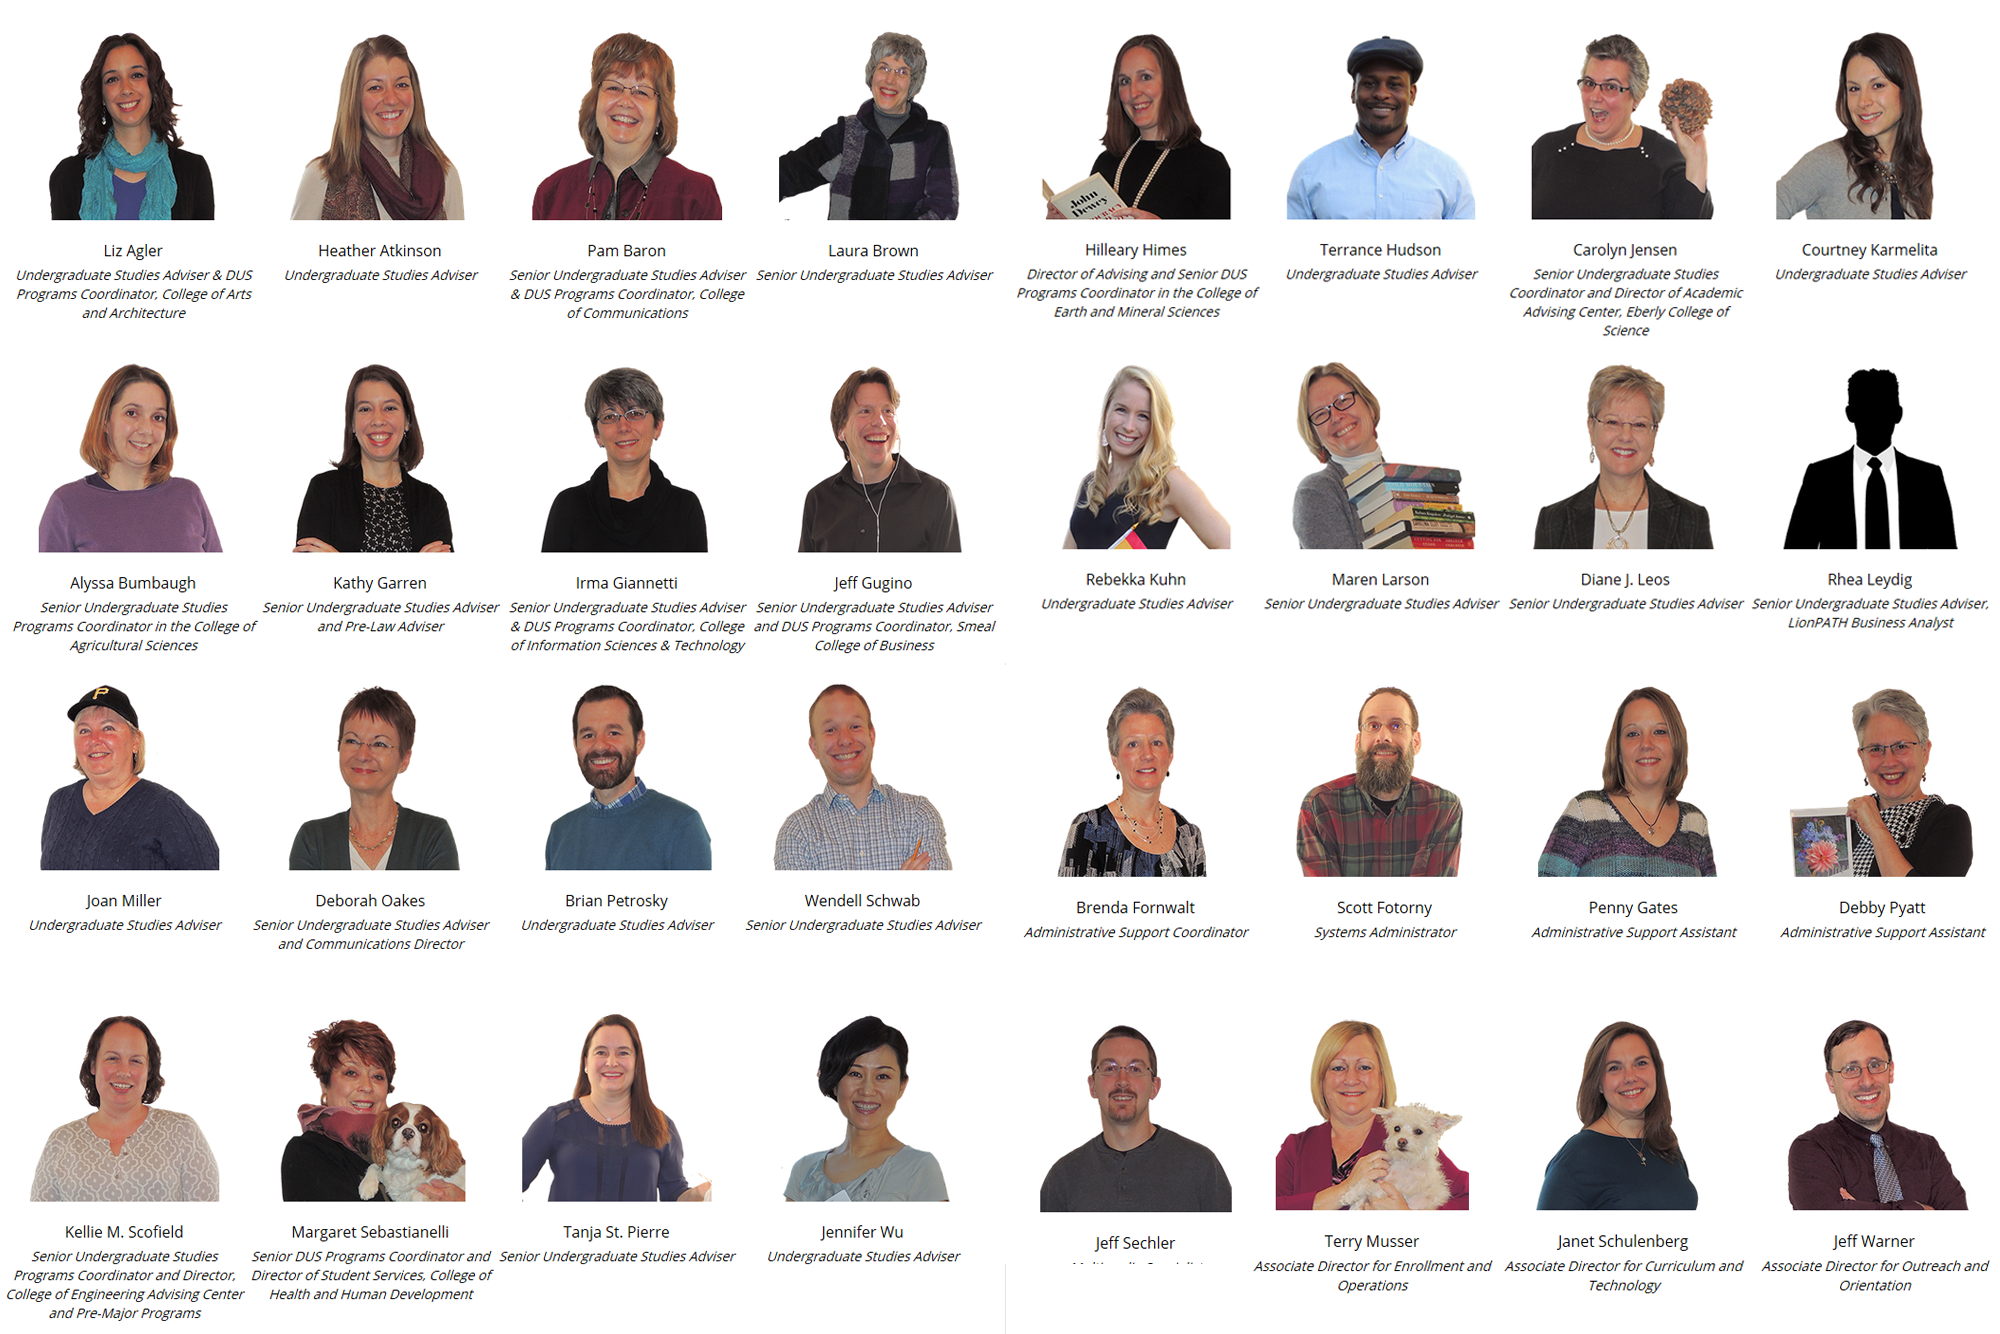 Staff biography images in a collage. Click on the image to visit our Staff page on the DUS website.